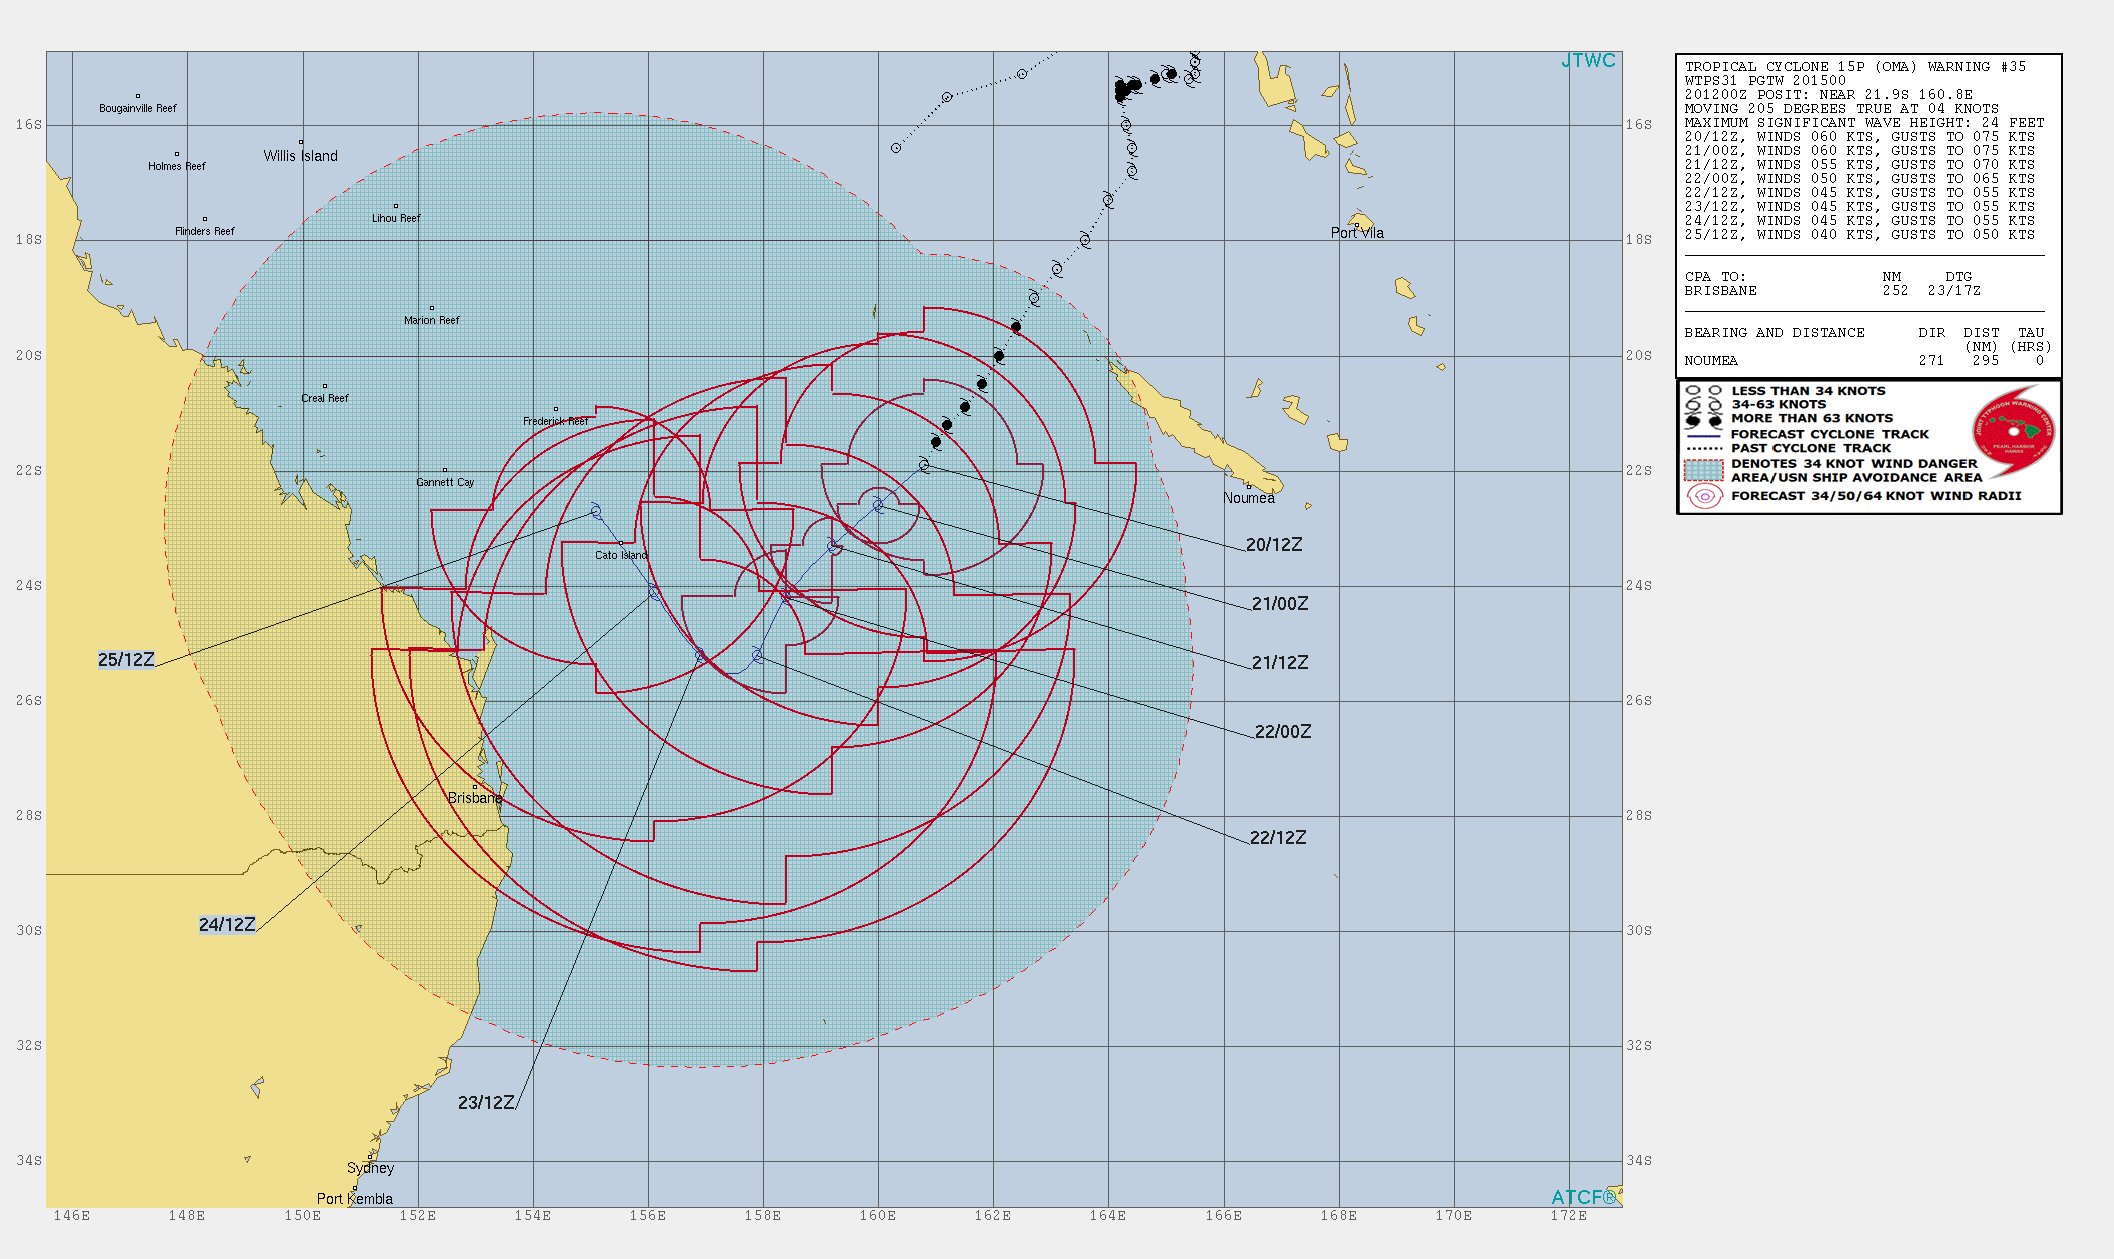 15UTC: cyclone OMA(15P): slow-moving and slowly weakening, changed forecast track after 48hours